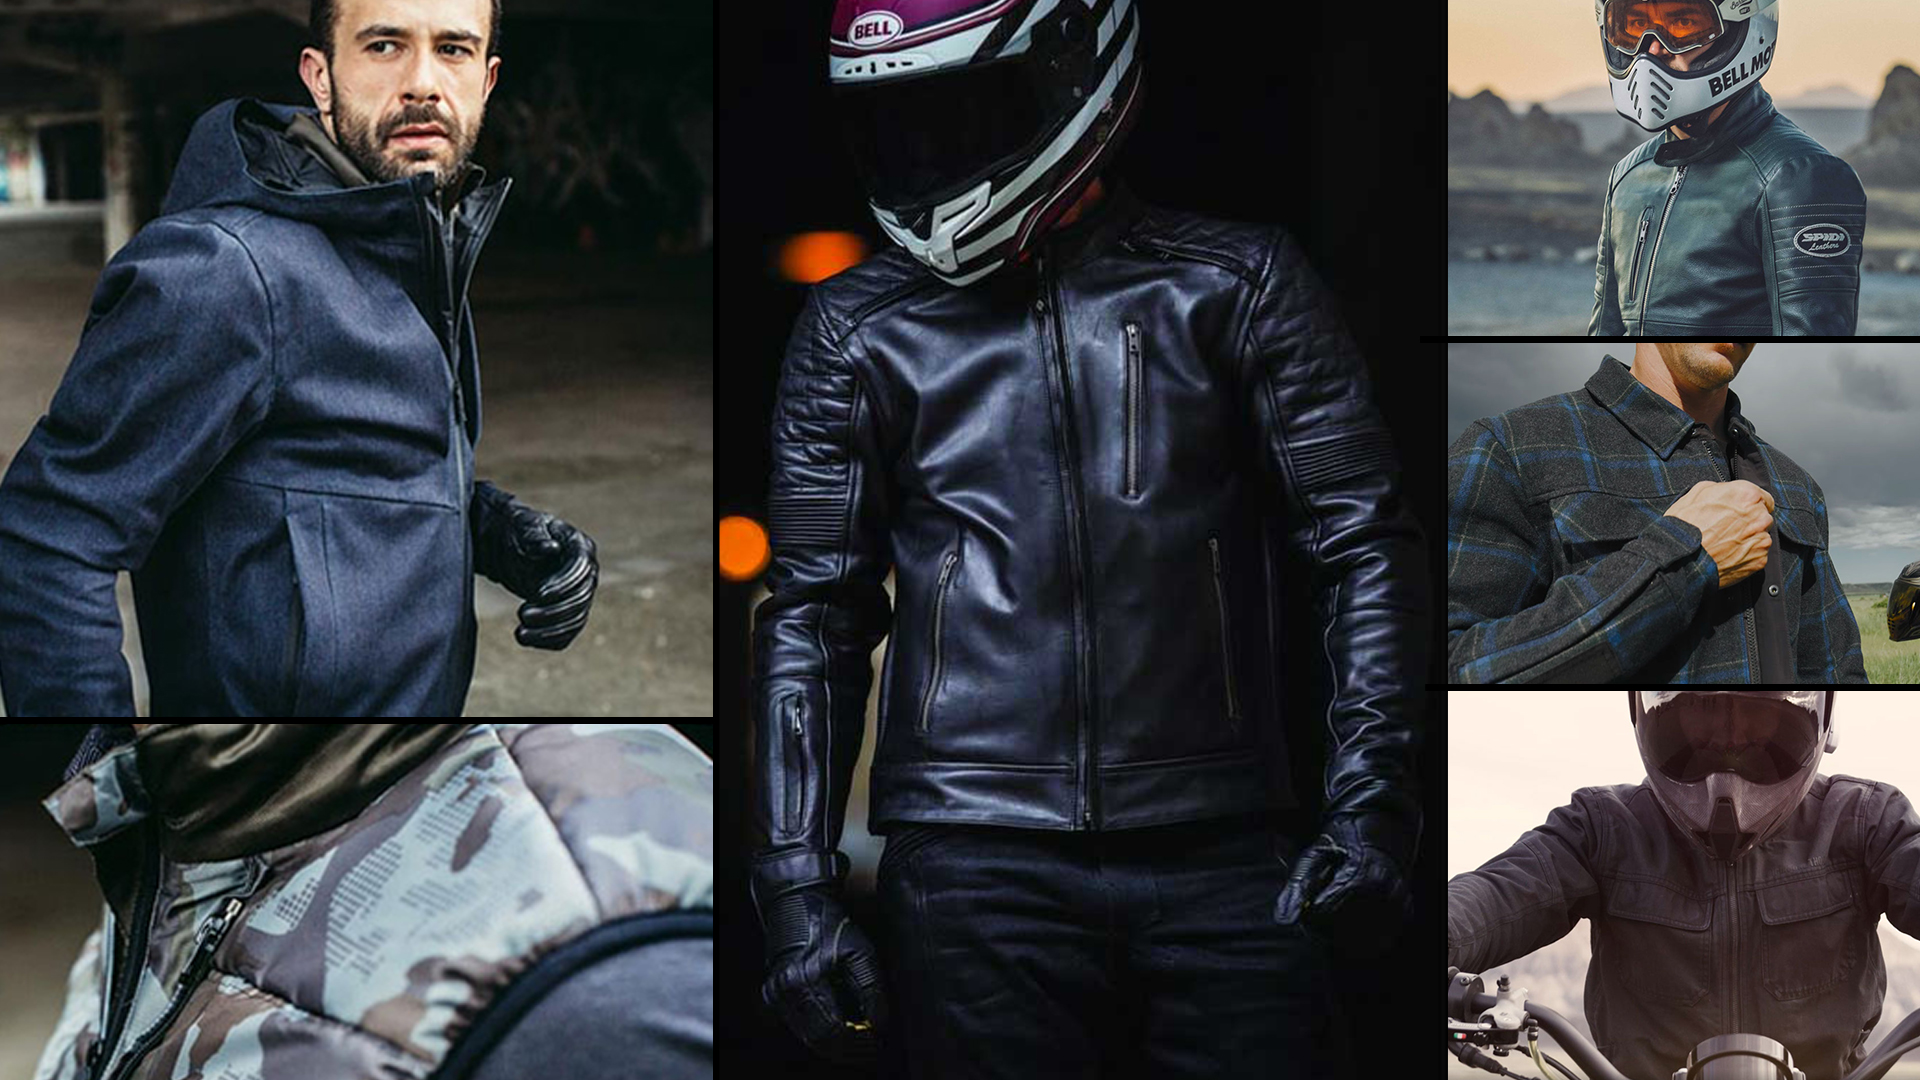 The Best Cafe Racers Jackets As Of May 2021, Who Makes The Best Leather Motorcycle Jackets